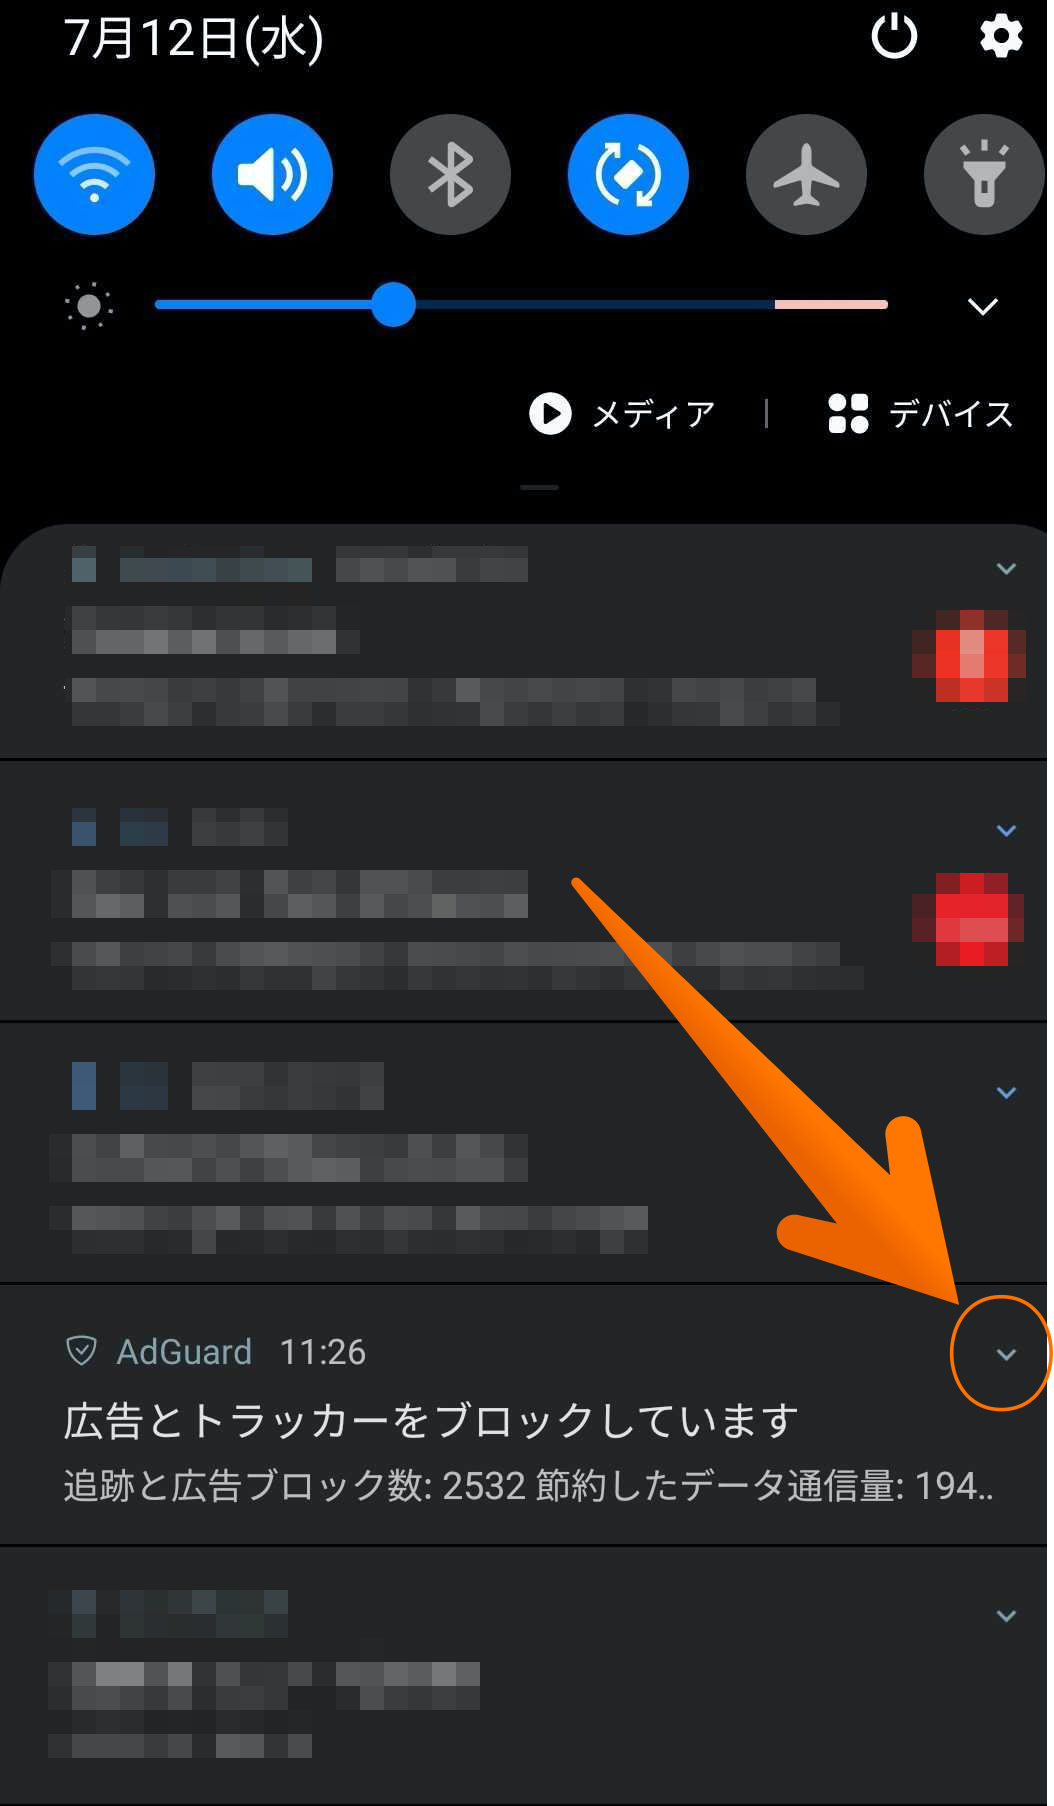 Expand AdGuard notification in the notification shade *mobile